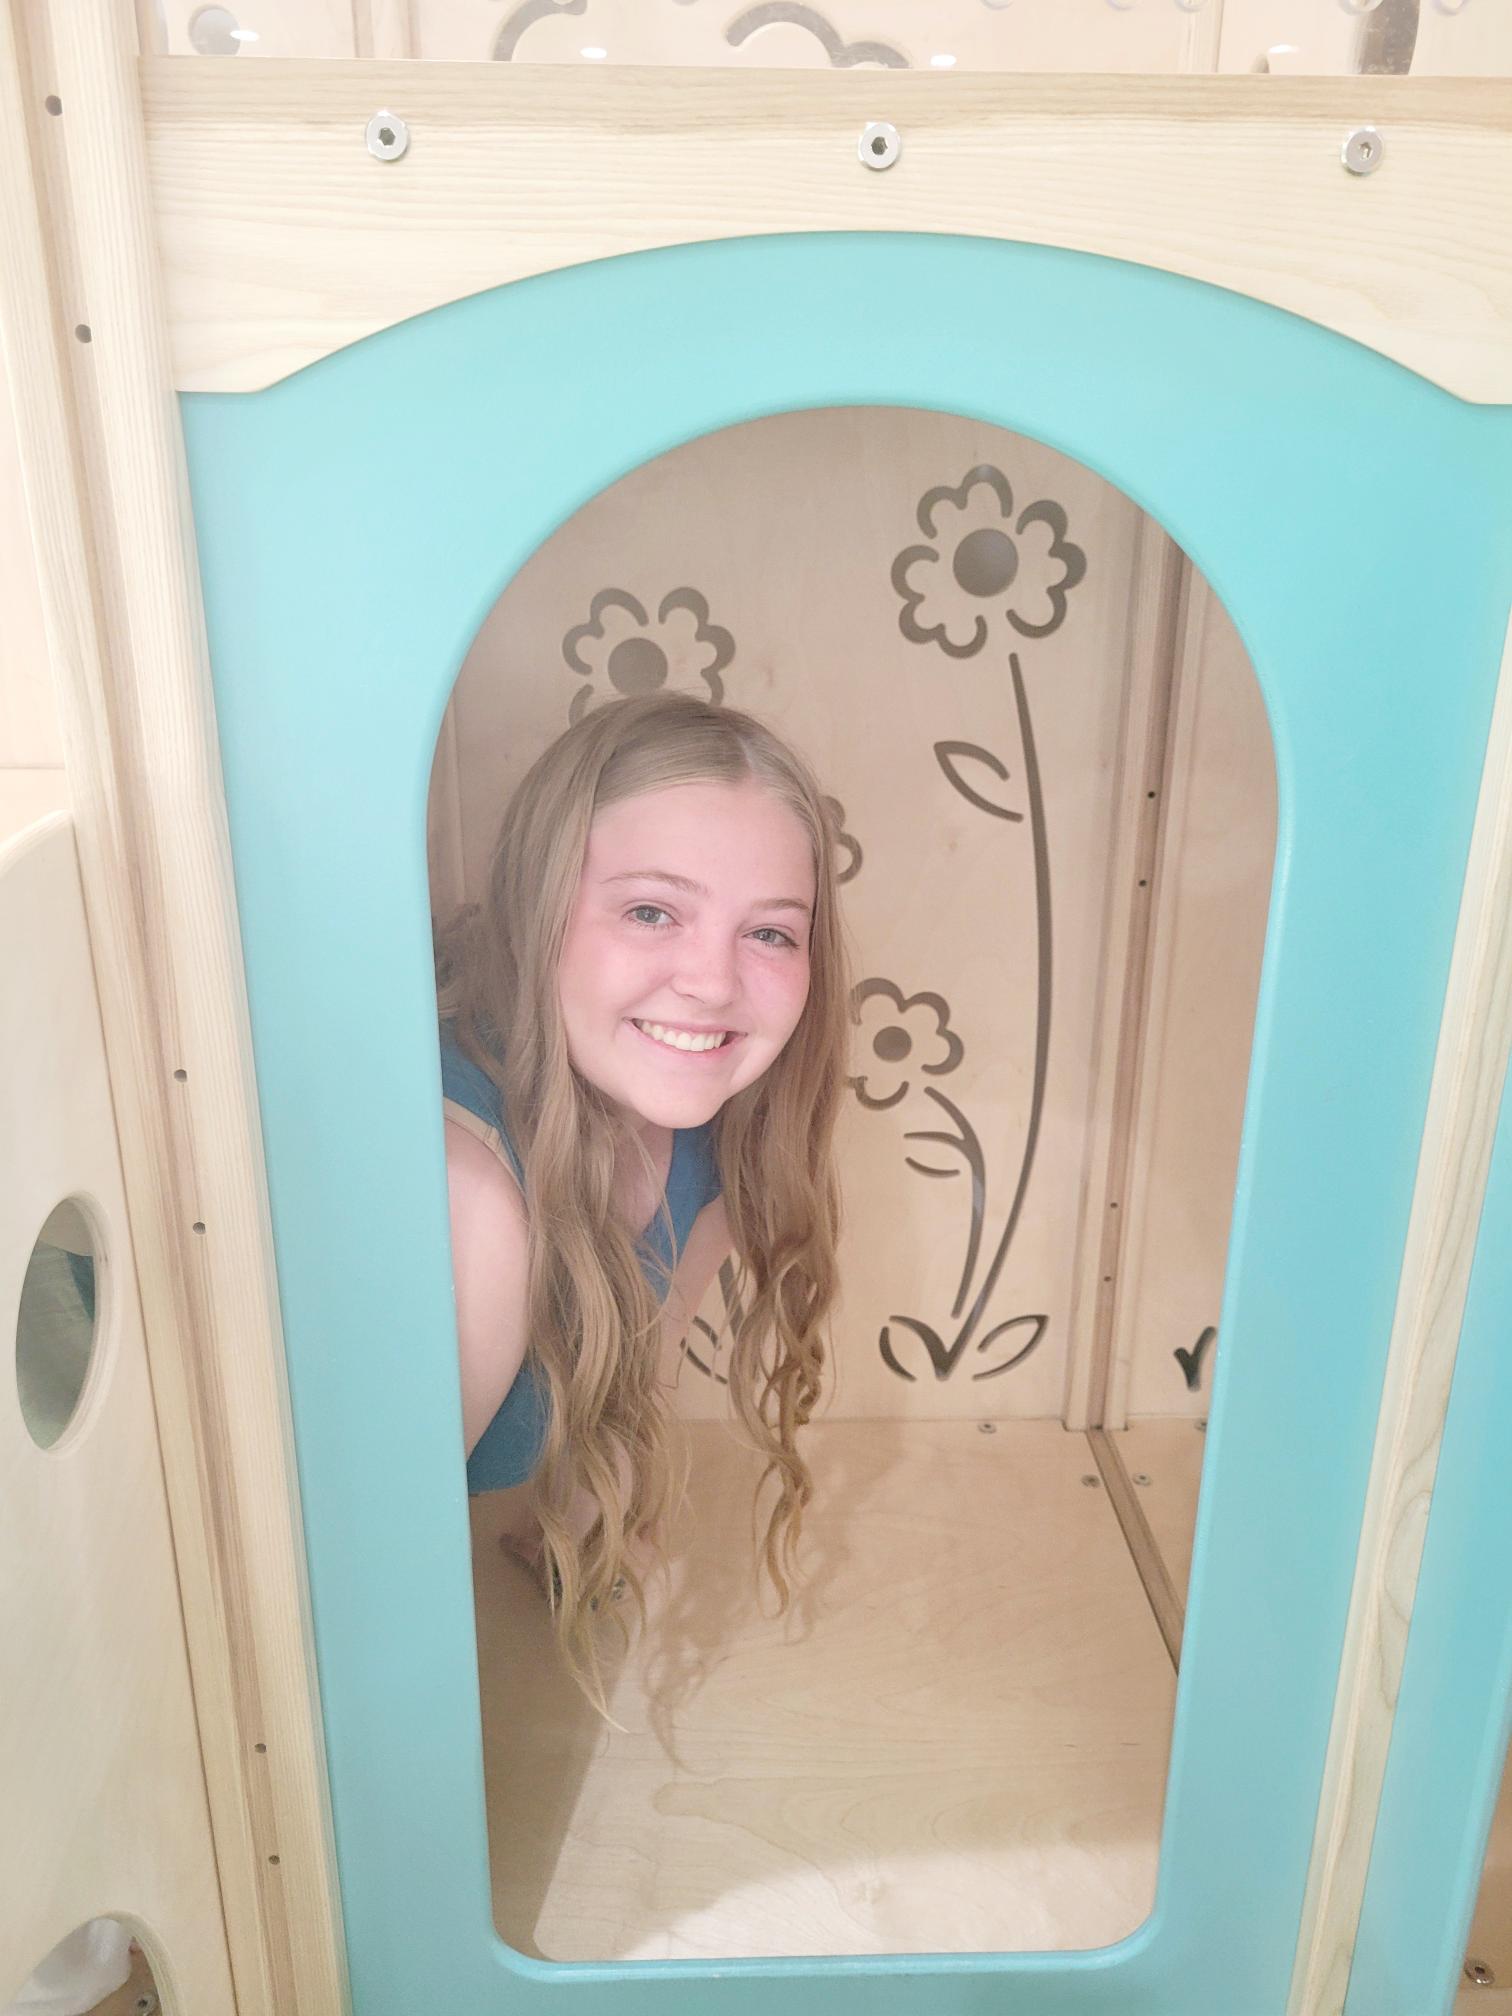 Peyton wearing a blue shirt smiling while inside a small wooden playhouse. The interior walls are decorated with simple flower drawings, and the playhouse has a light blue arch-shaped doorway